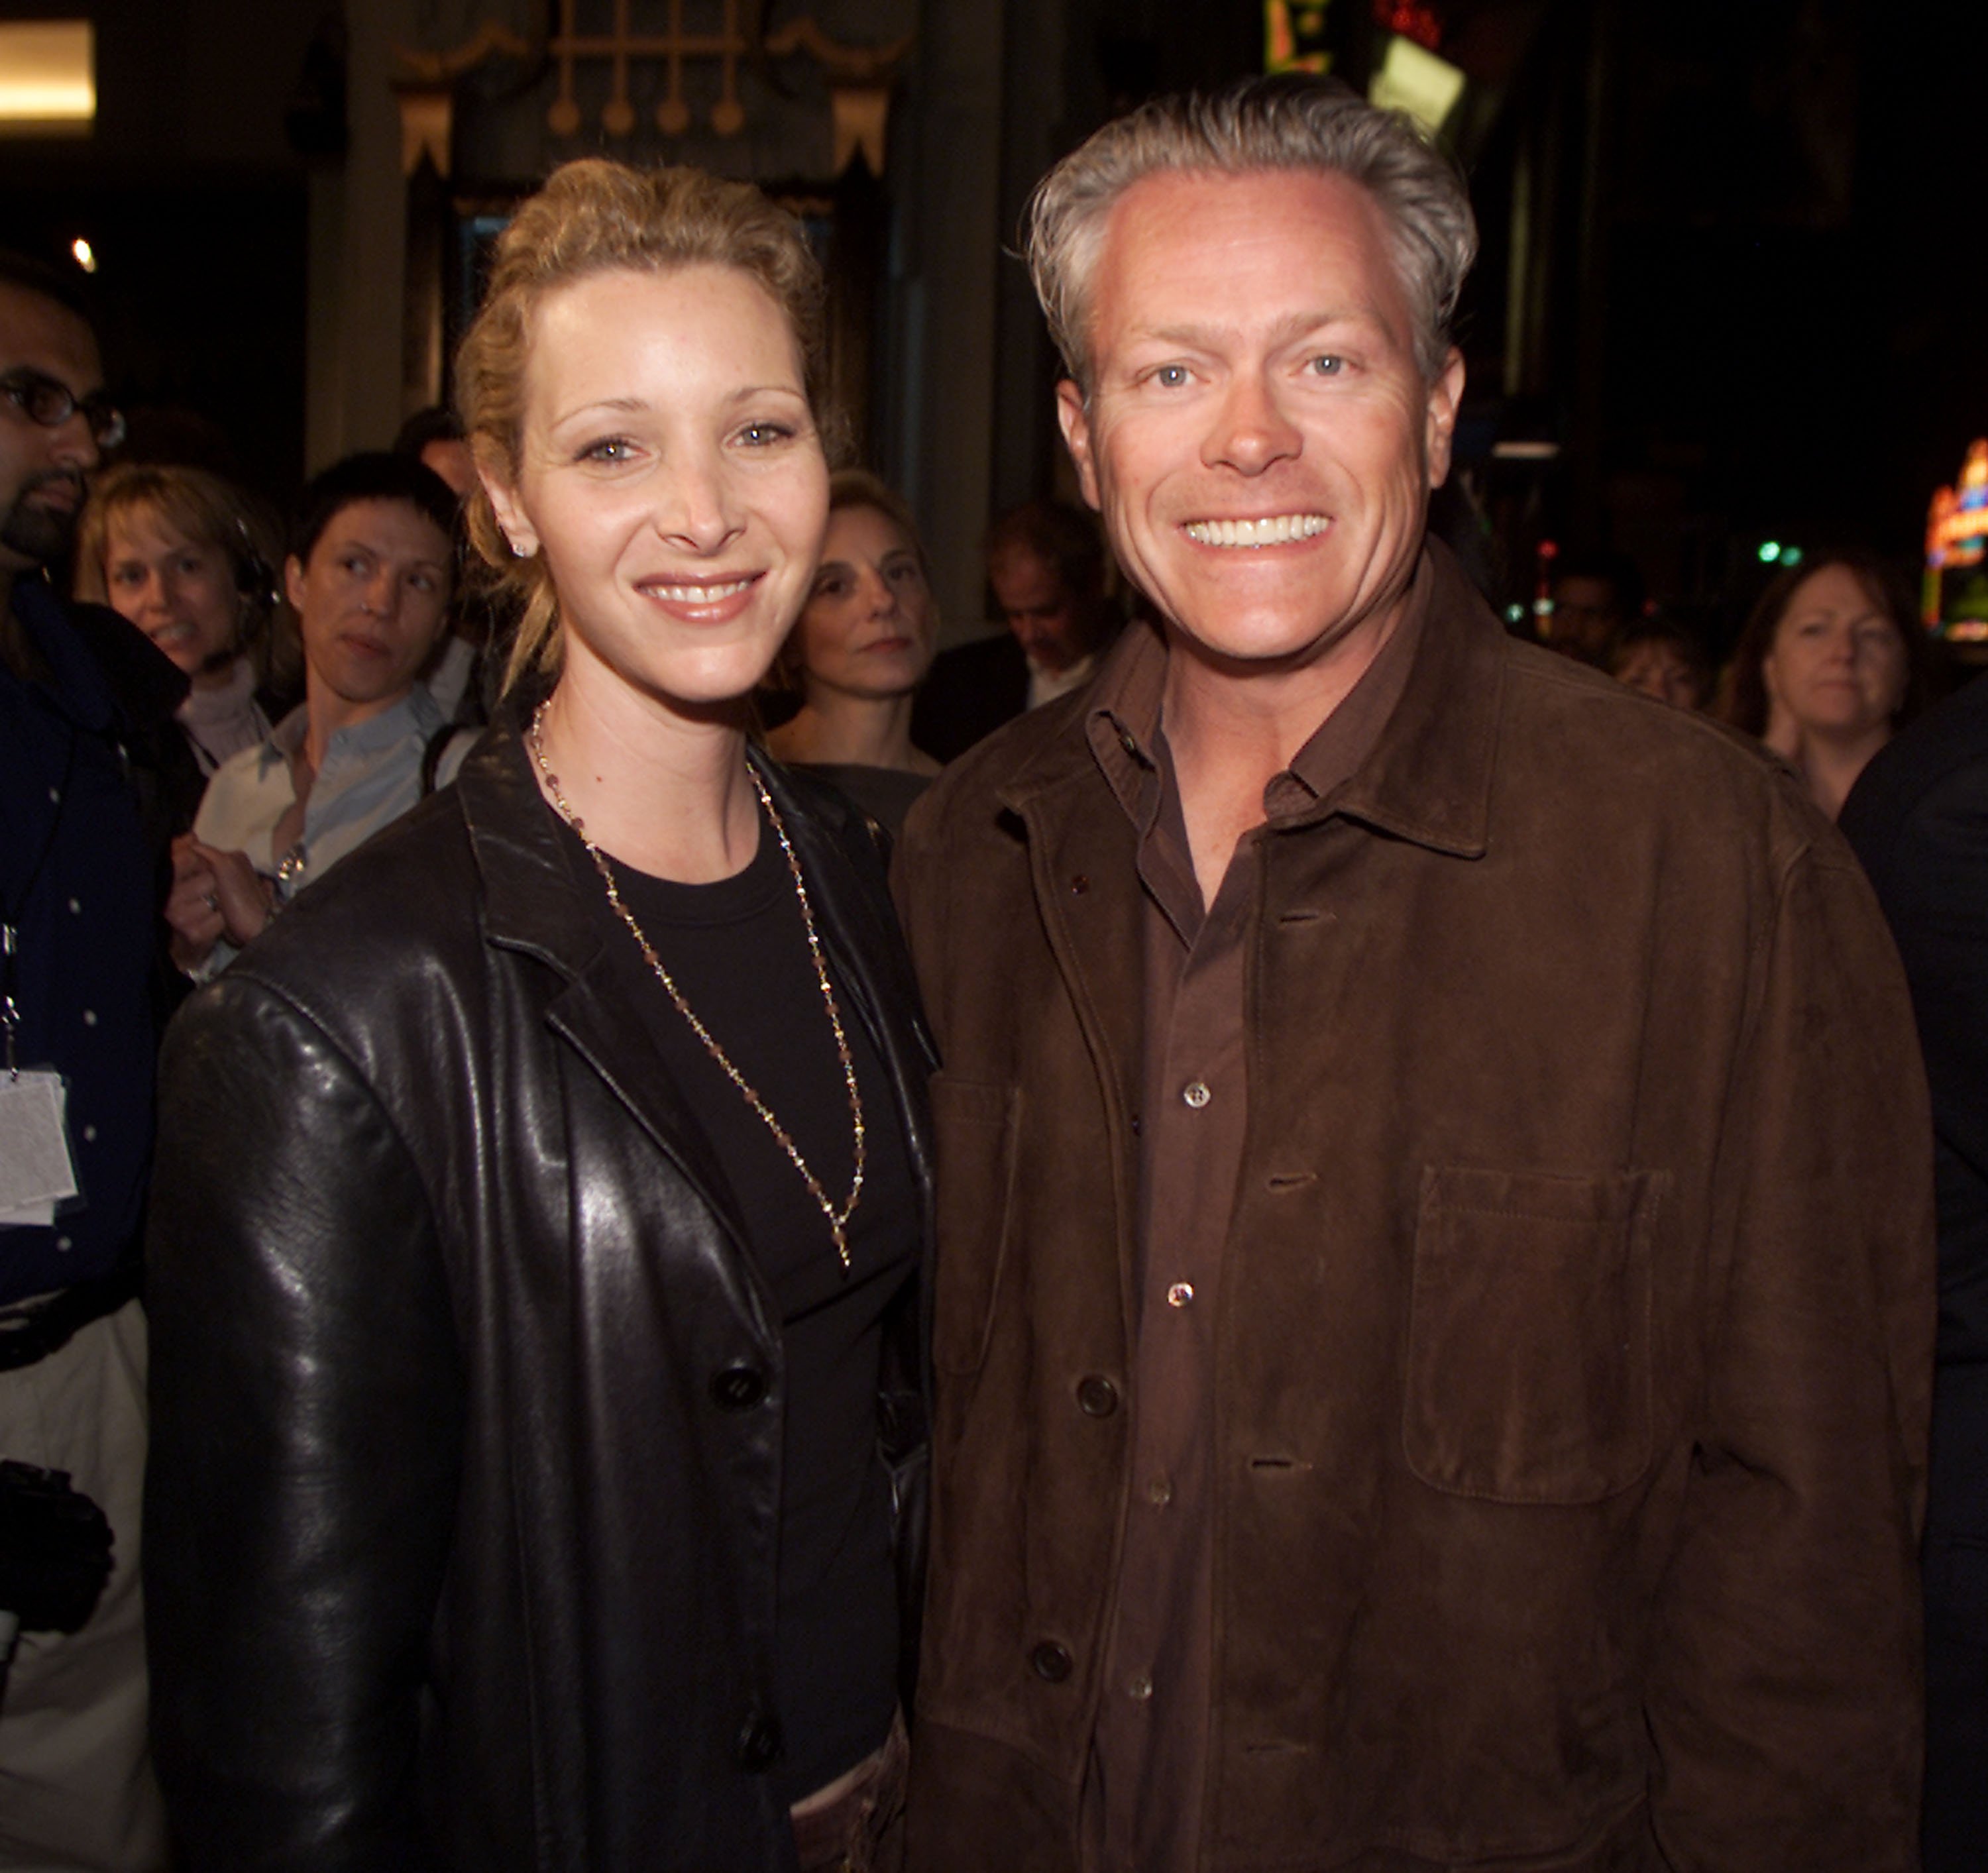 Lisa Kudrow and Michel Stern at the premiere of "Showtime" at the Chinese Theater in Los Angeles, Ca. Monday, March 11, 2002. | Source: Getty Images.